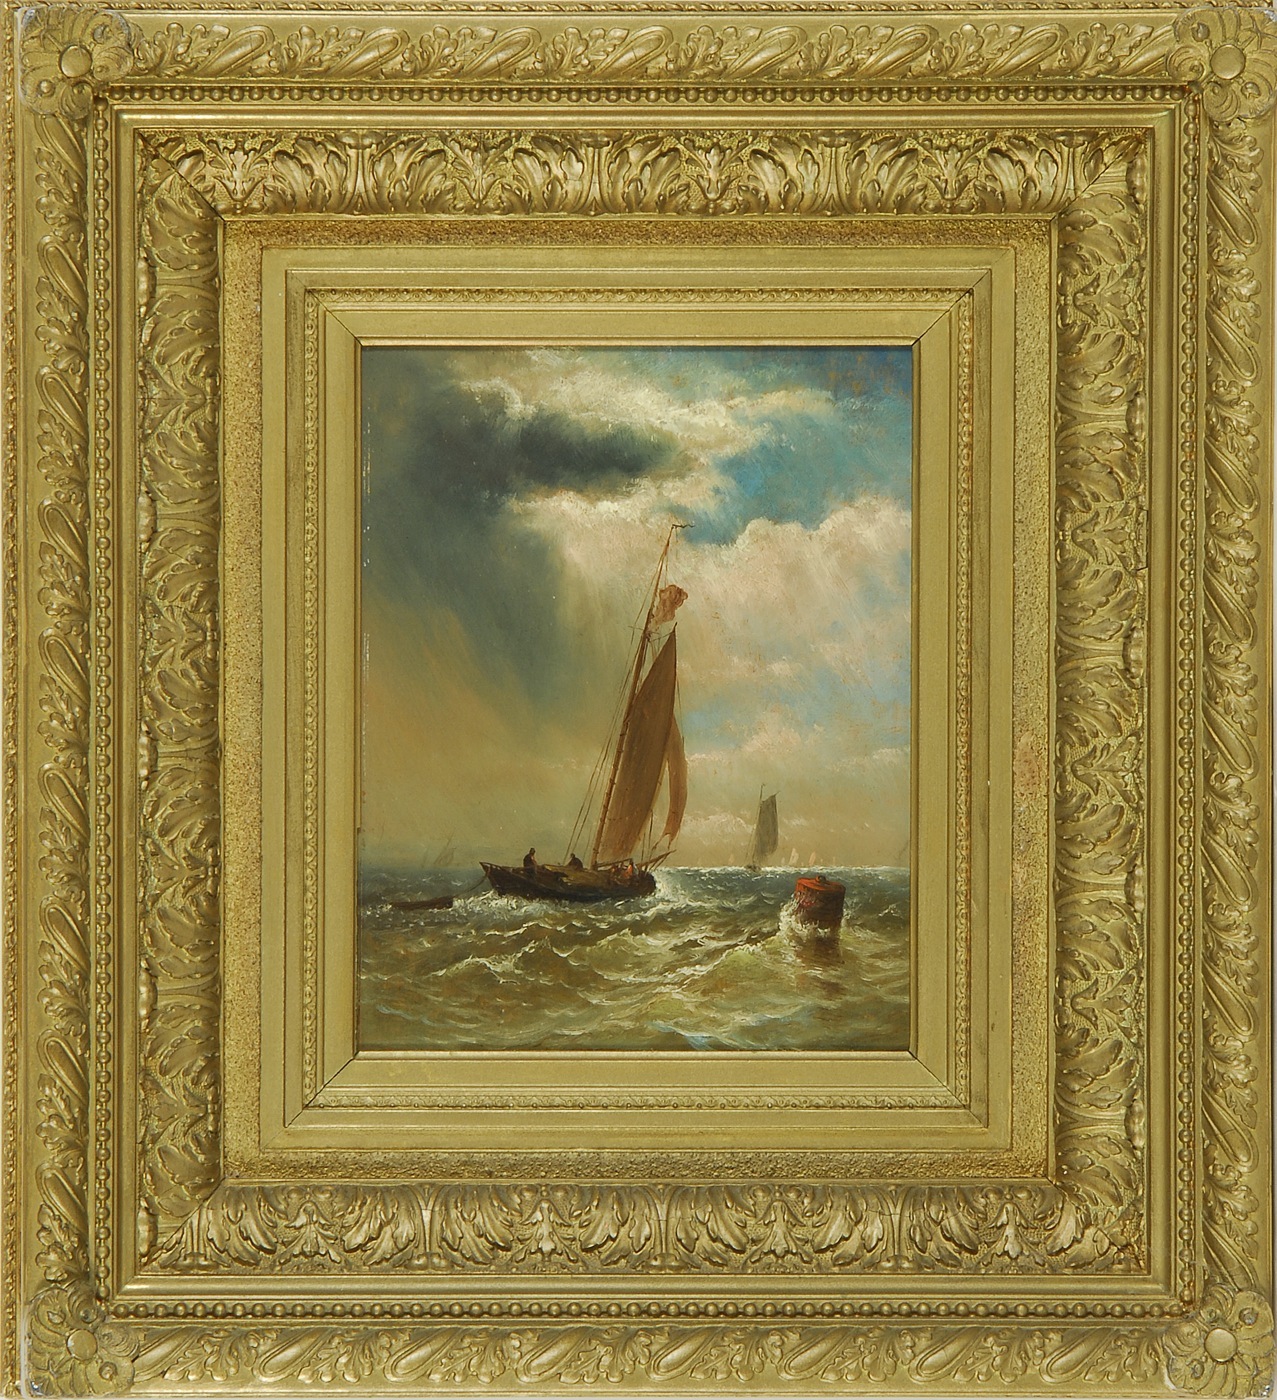 ATTRIBUTED TO CHARLES HENRY GIFFORDAmerican 14dd40